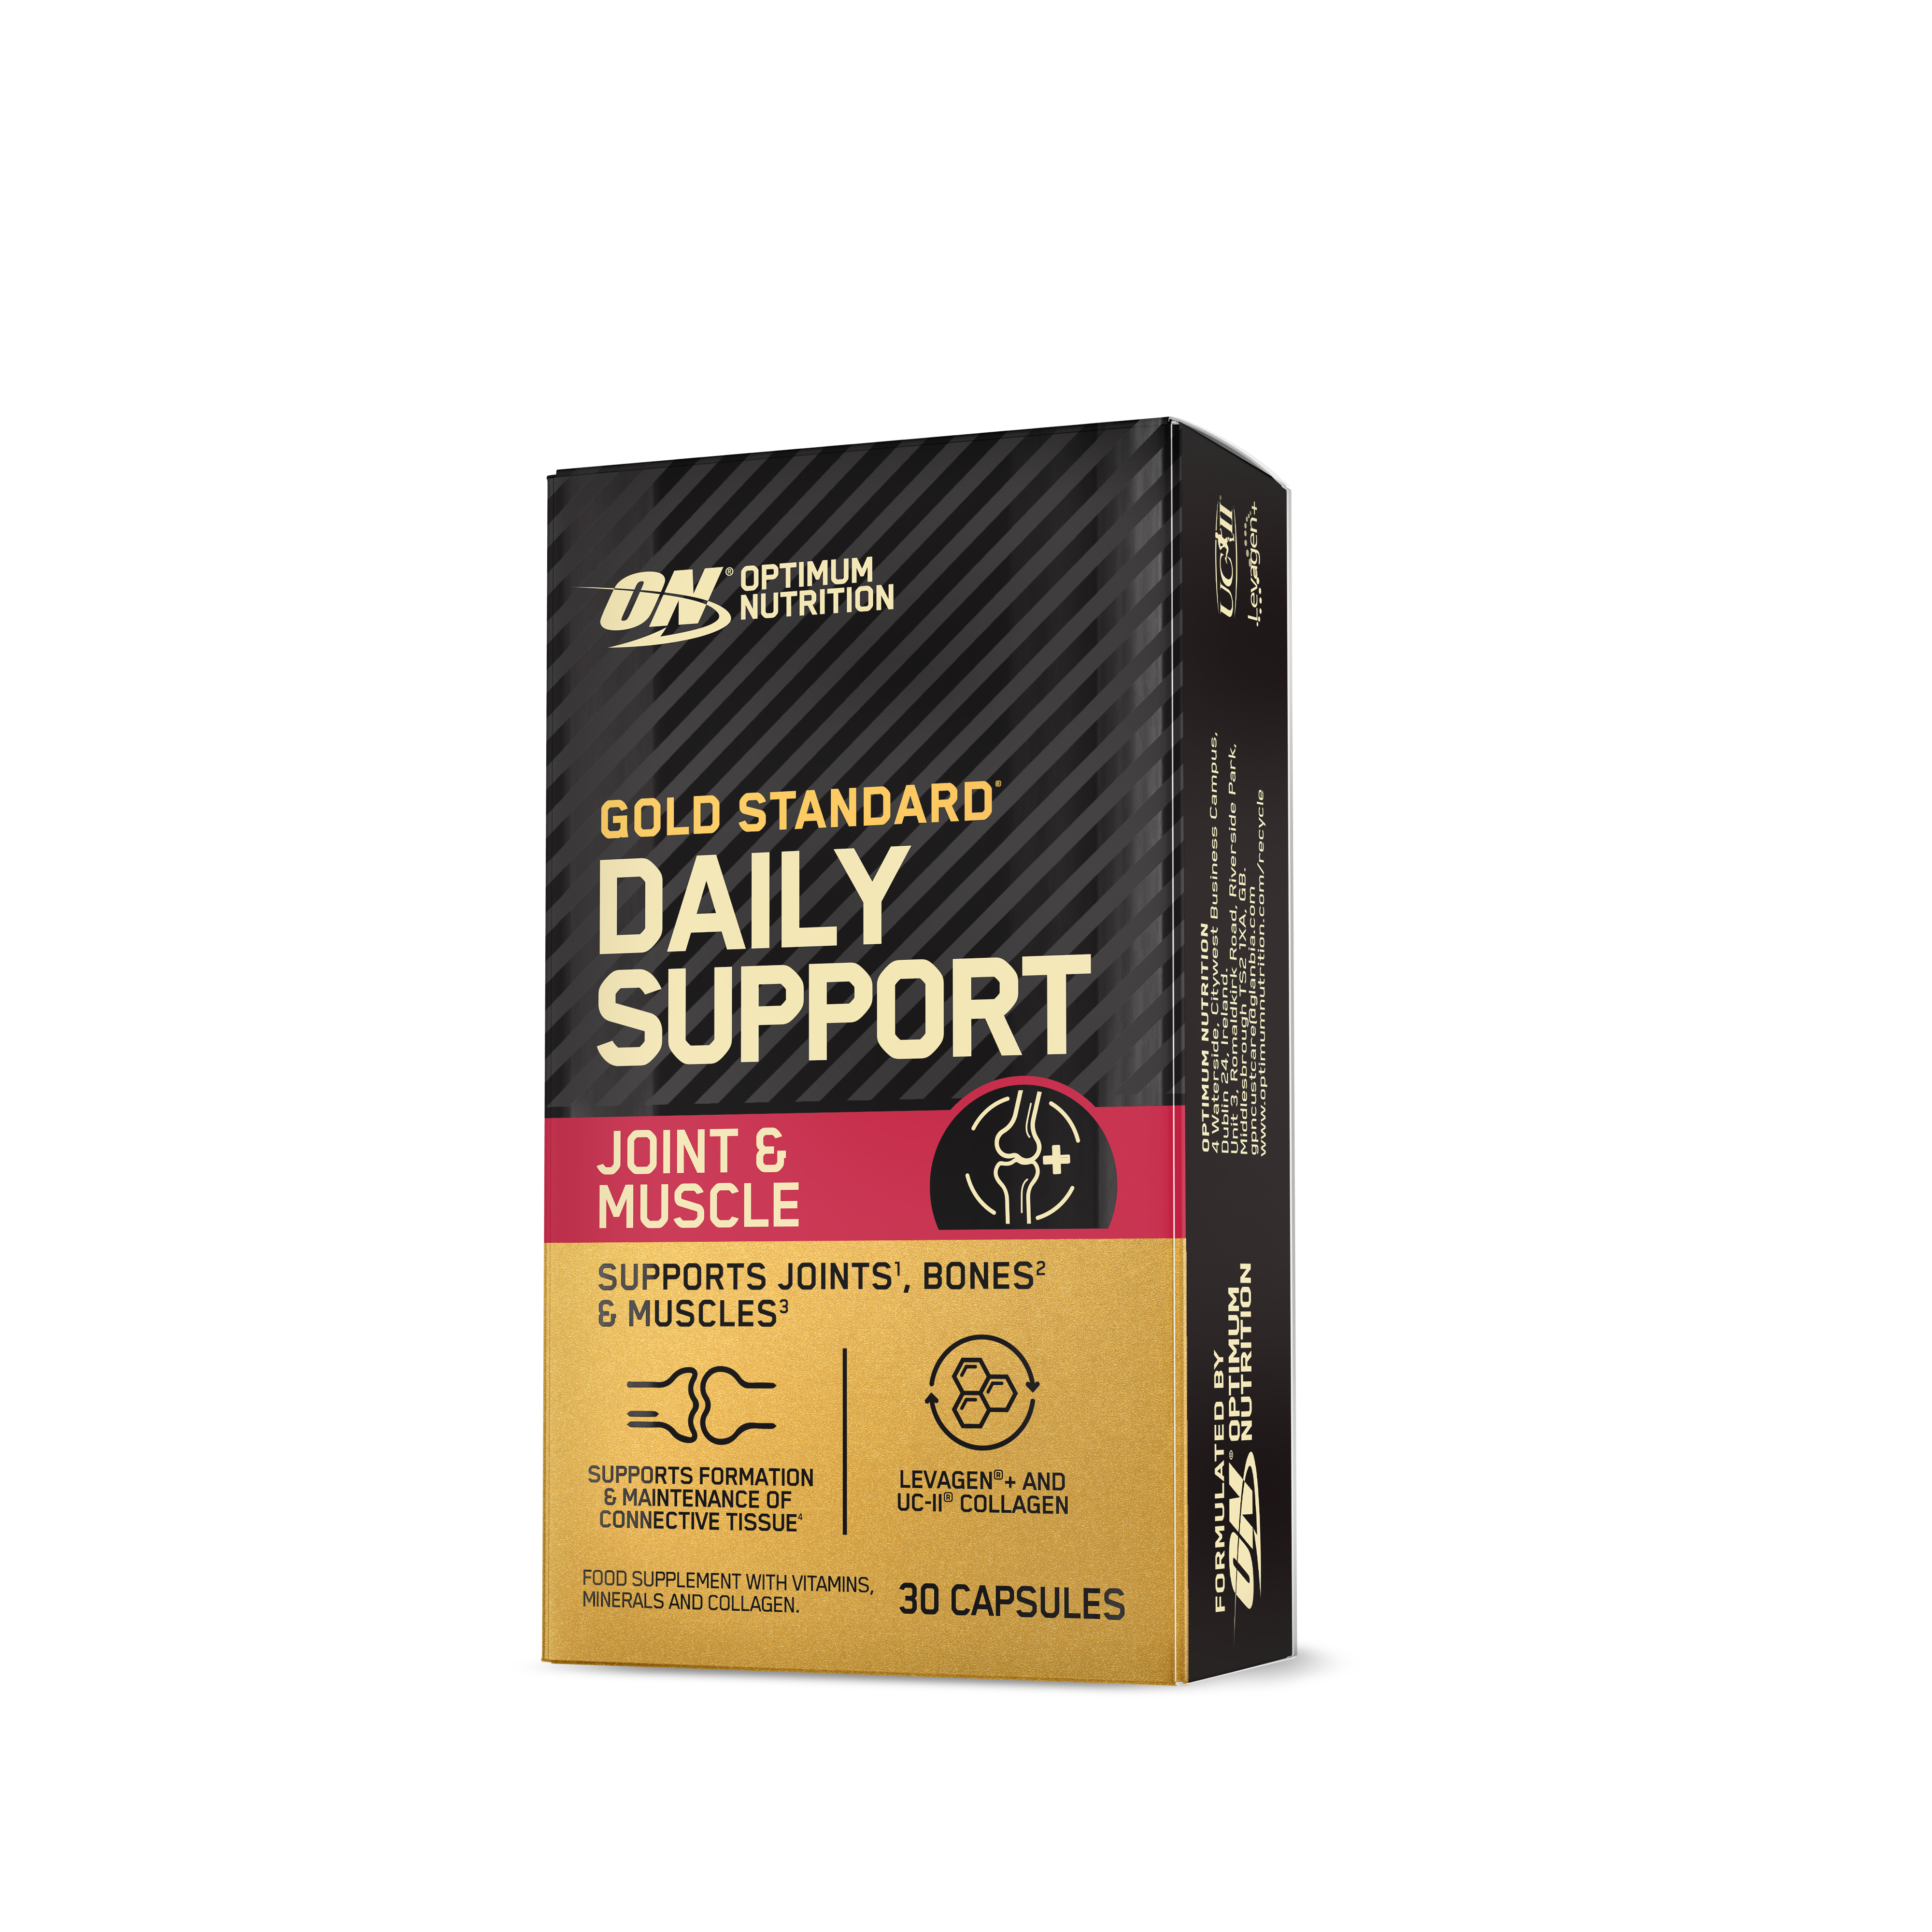 Optimum Nutrition Gold Standard Daily Support Joint & Muscle - Sportsupplement - Supplement - 60 Capsules